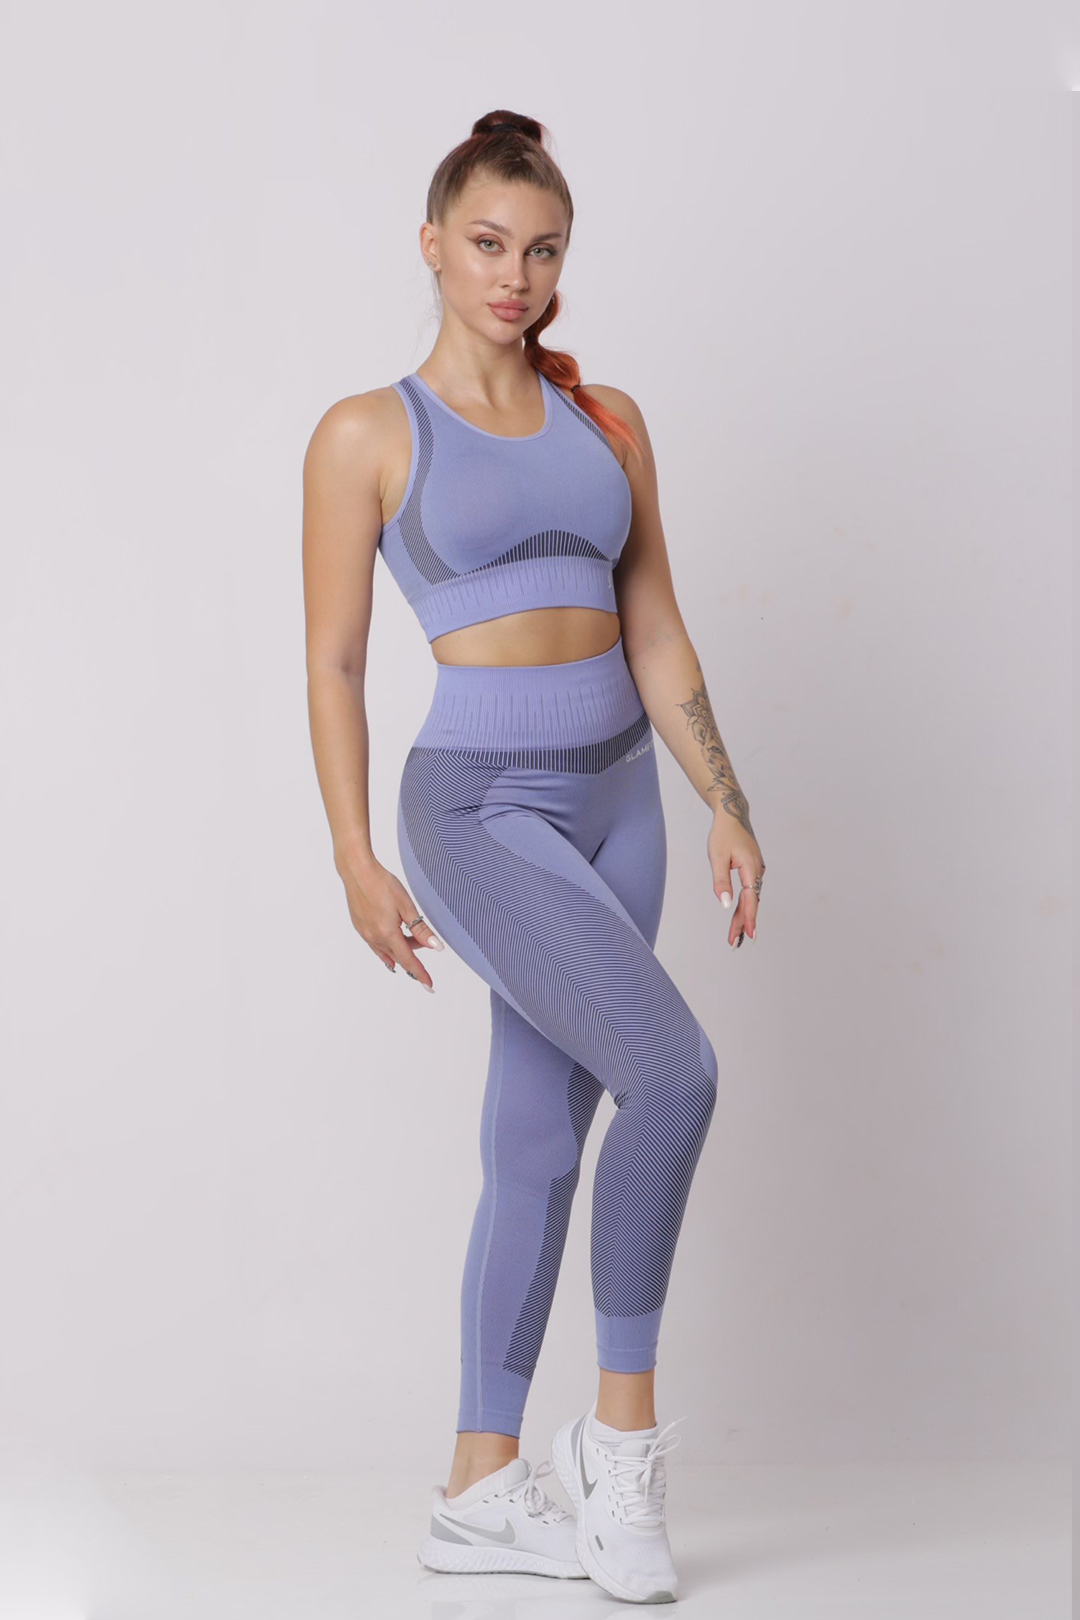 Ladies Sportswear Women's Soft Compression Bra and Jacket Set in Light Baby  Pink! Shop Now